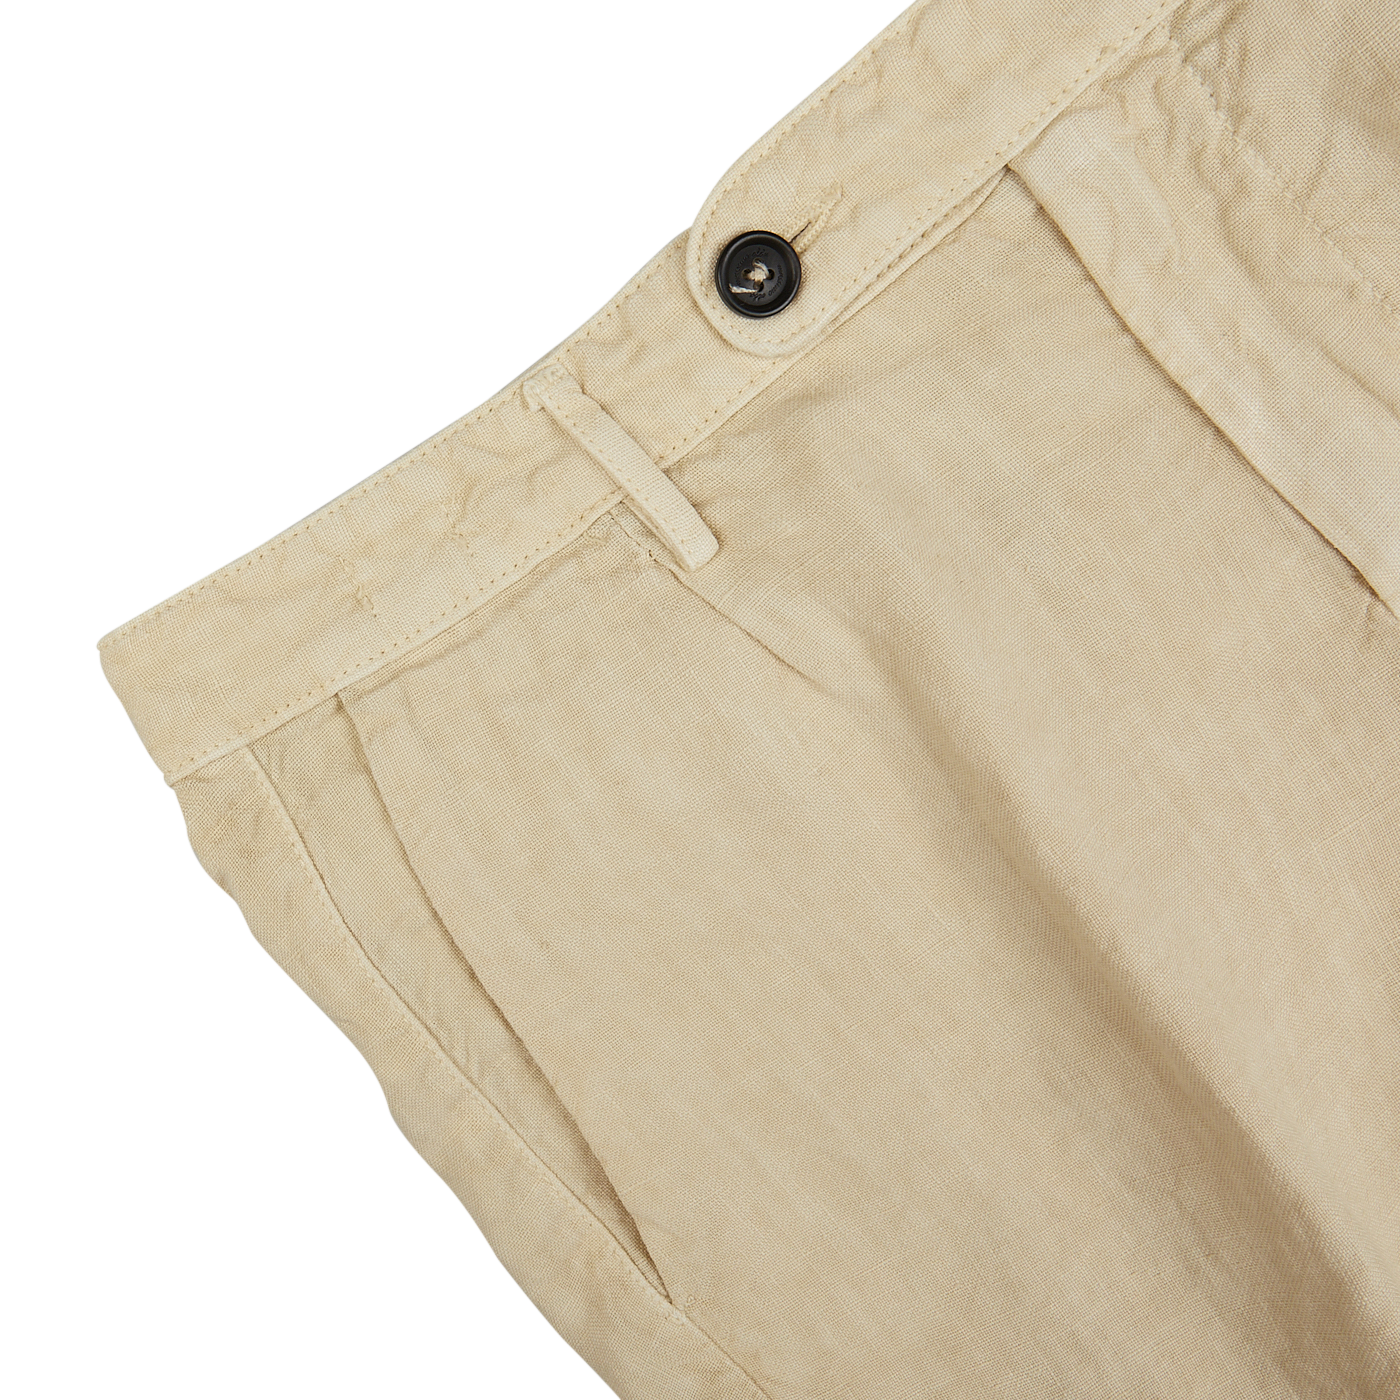 Close-up of a Massimo Alba light beige pure linen canvas trouser waistband with a button closure.